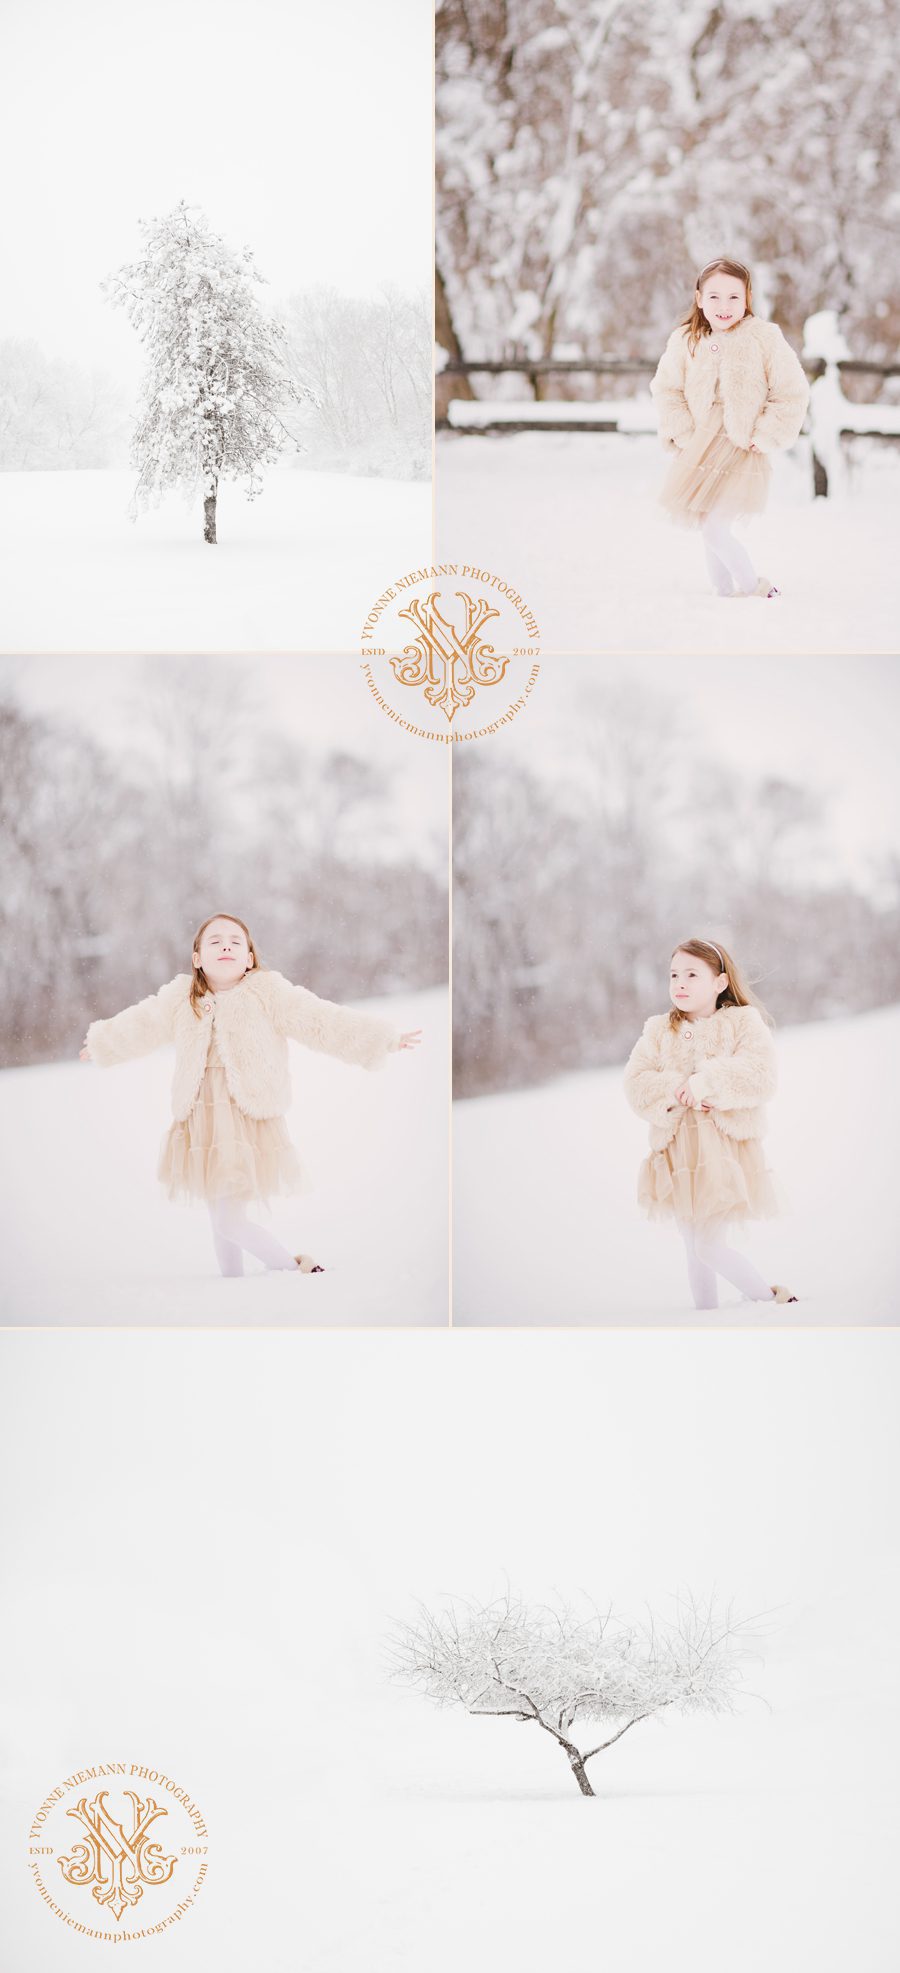 Fun child portraits in the snow of a six year old girl in St. Louis taken by Yvonne Niemann Photography.